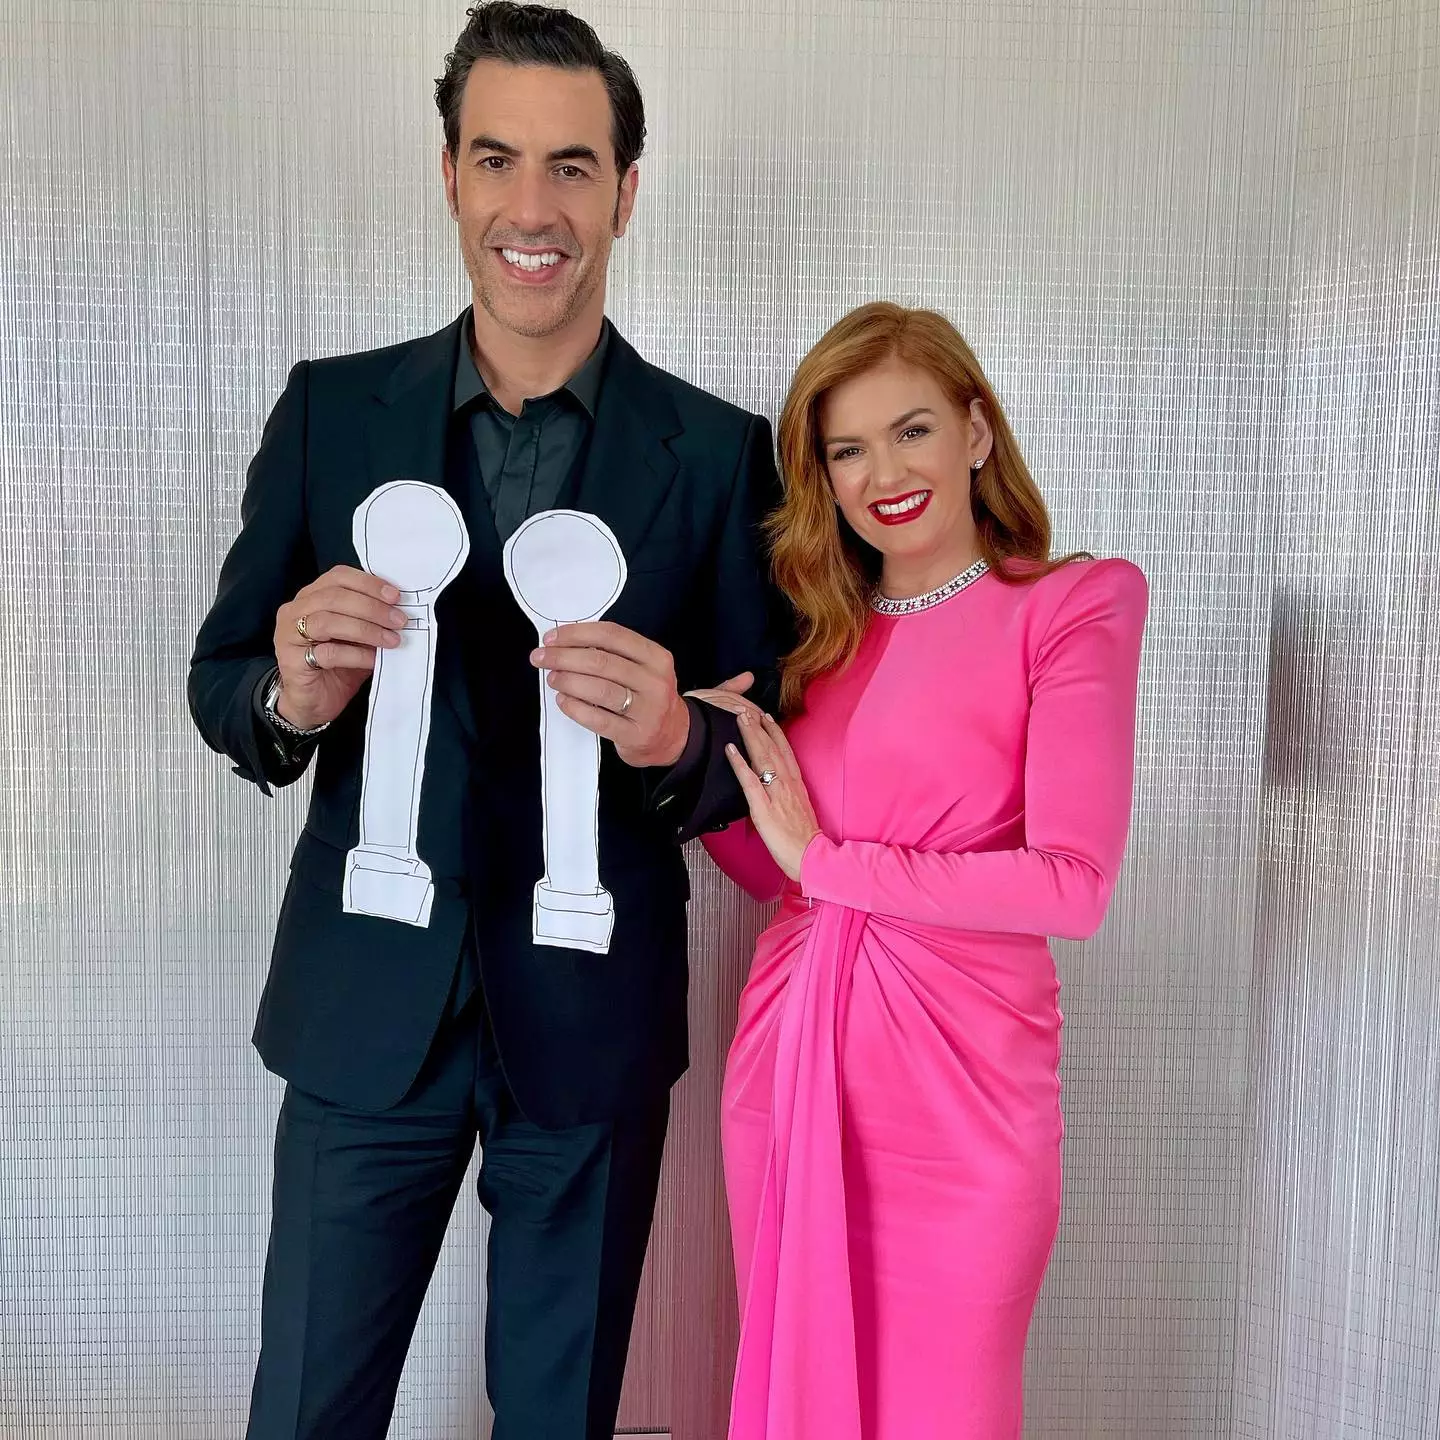 Isla Fisher and Sacha Baron Cohen were together for over 20 years.